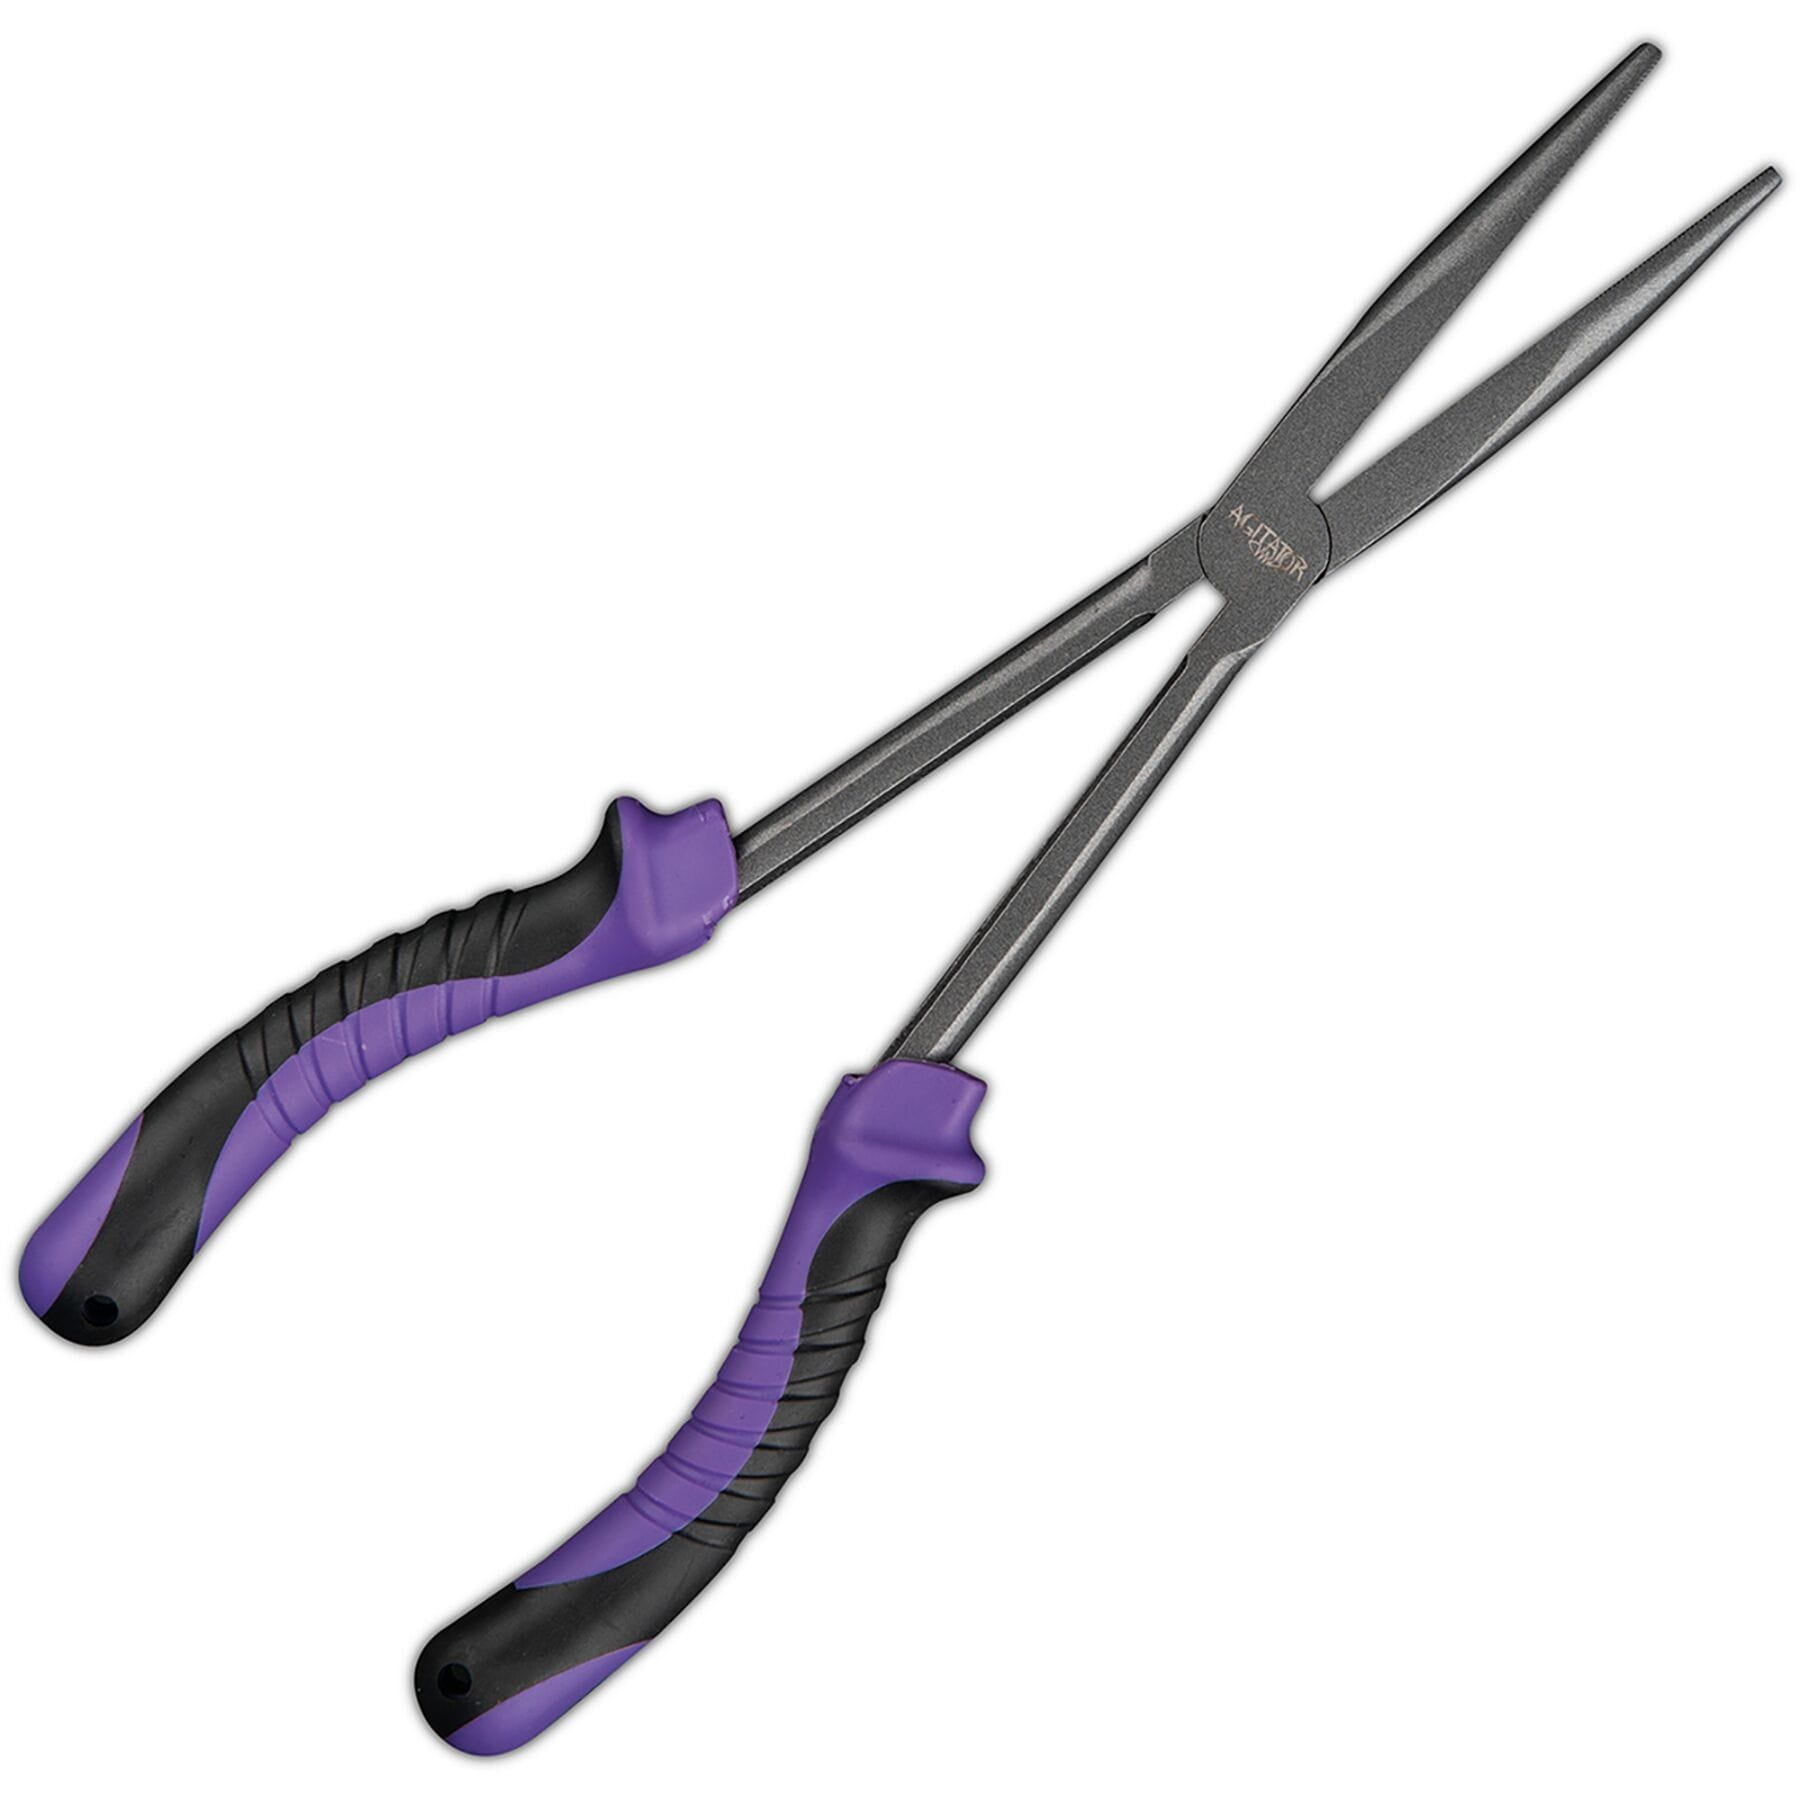 Fishing Tools - Pliers, Forceps, Hook Removers, Scales